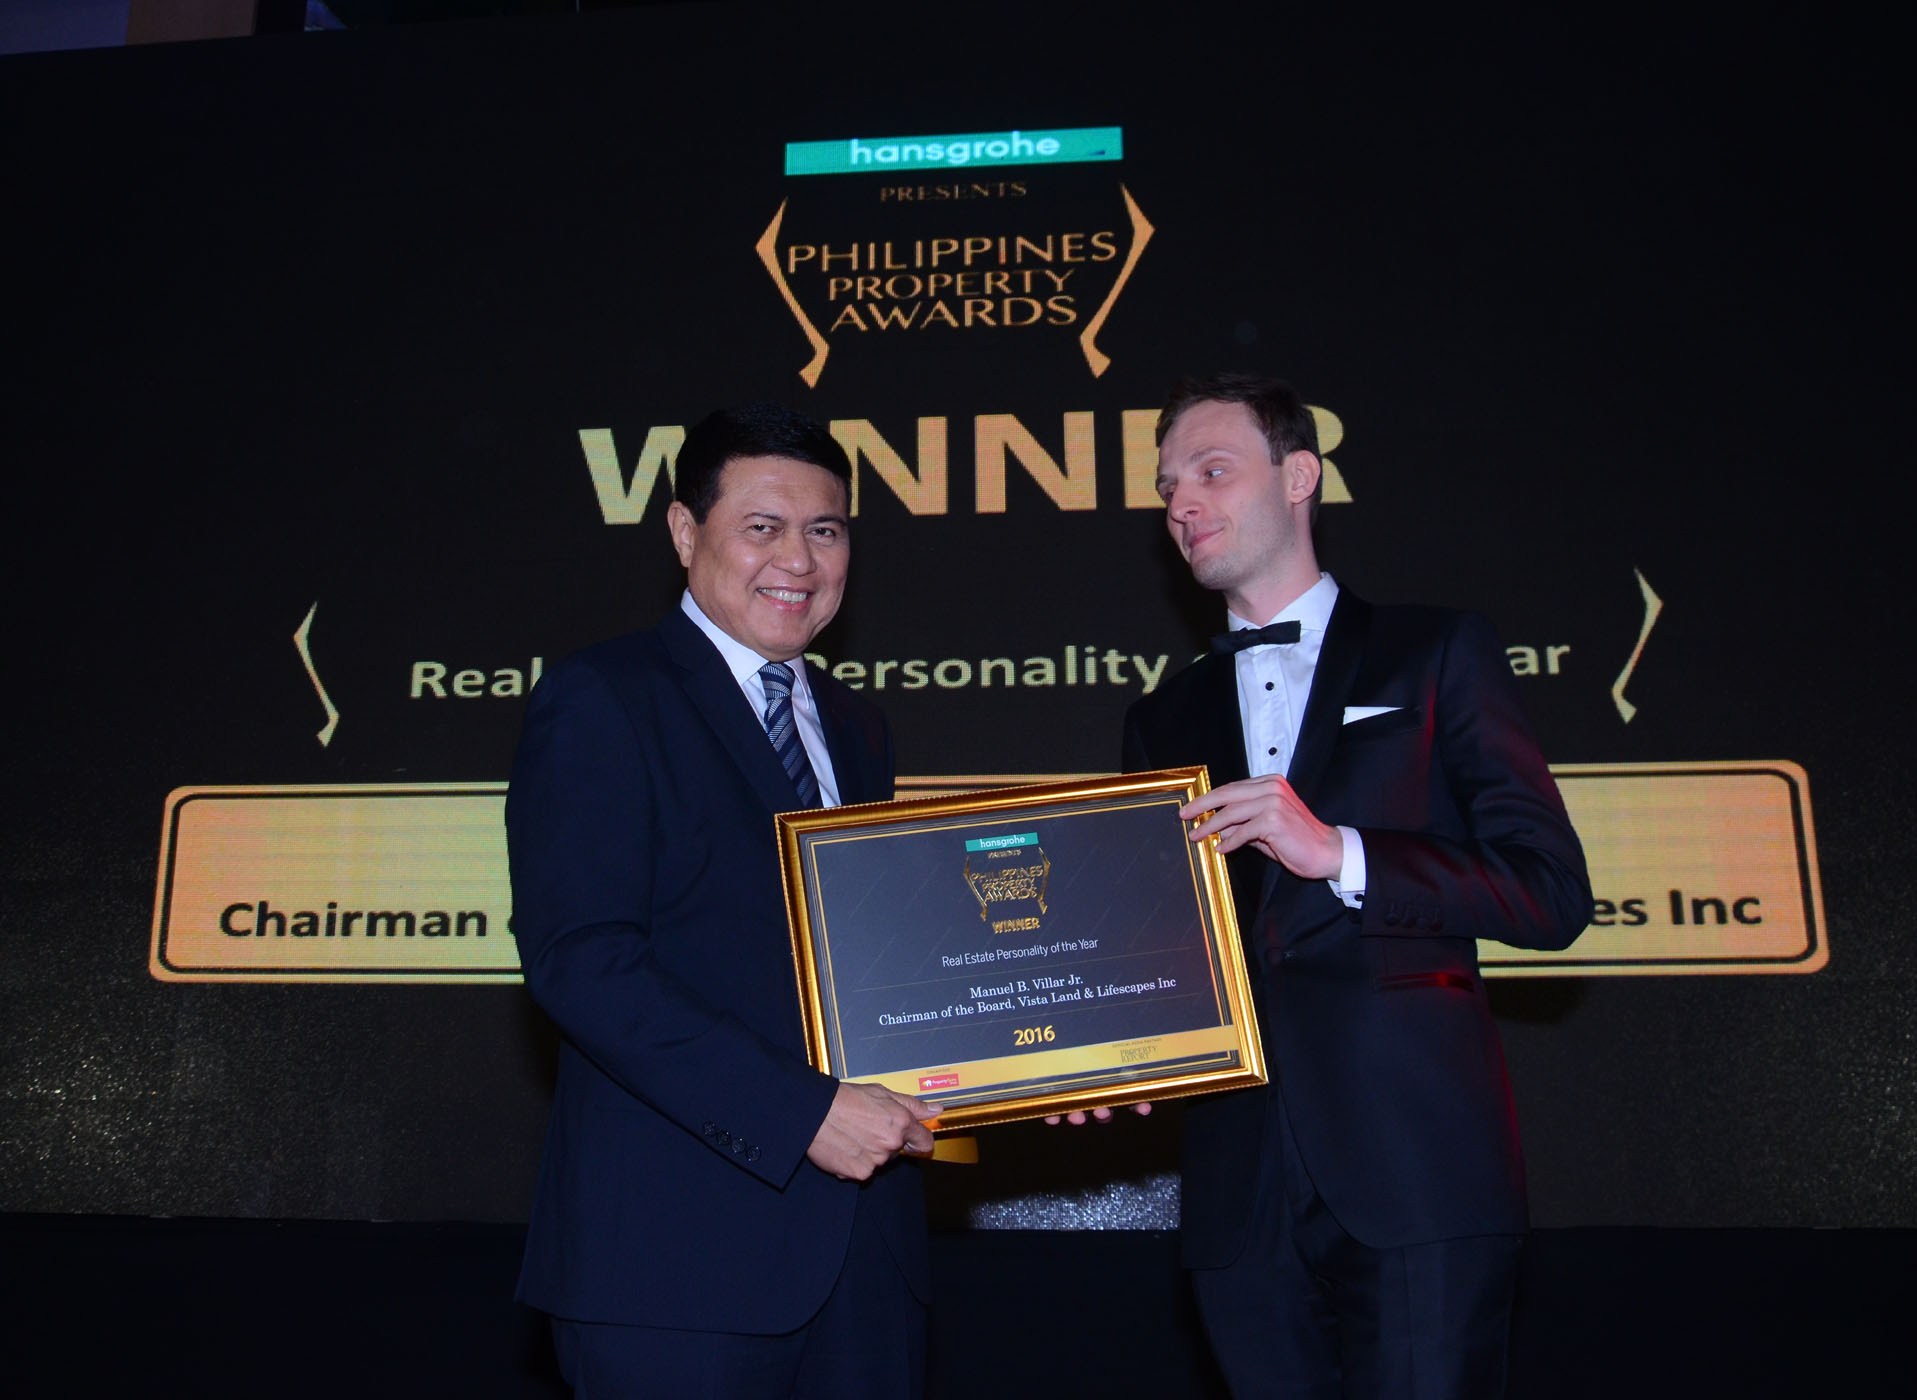 PHILIPPINES PROPERTY AWARDS Real Estate Personality of the Year